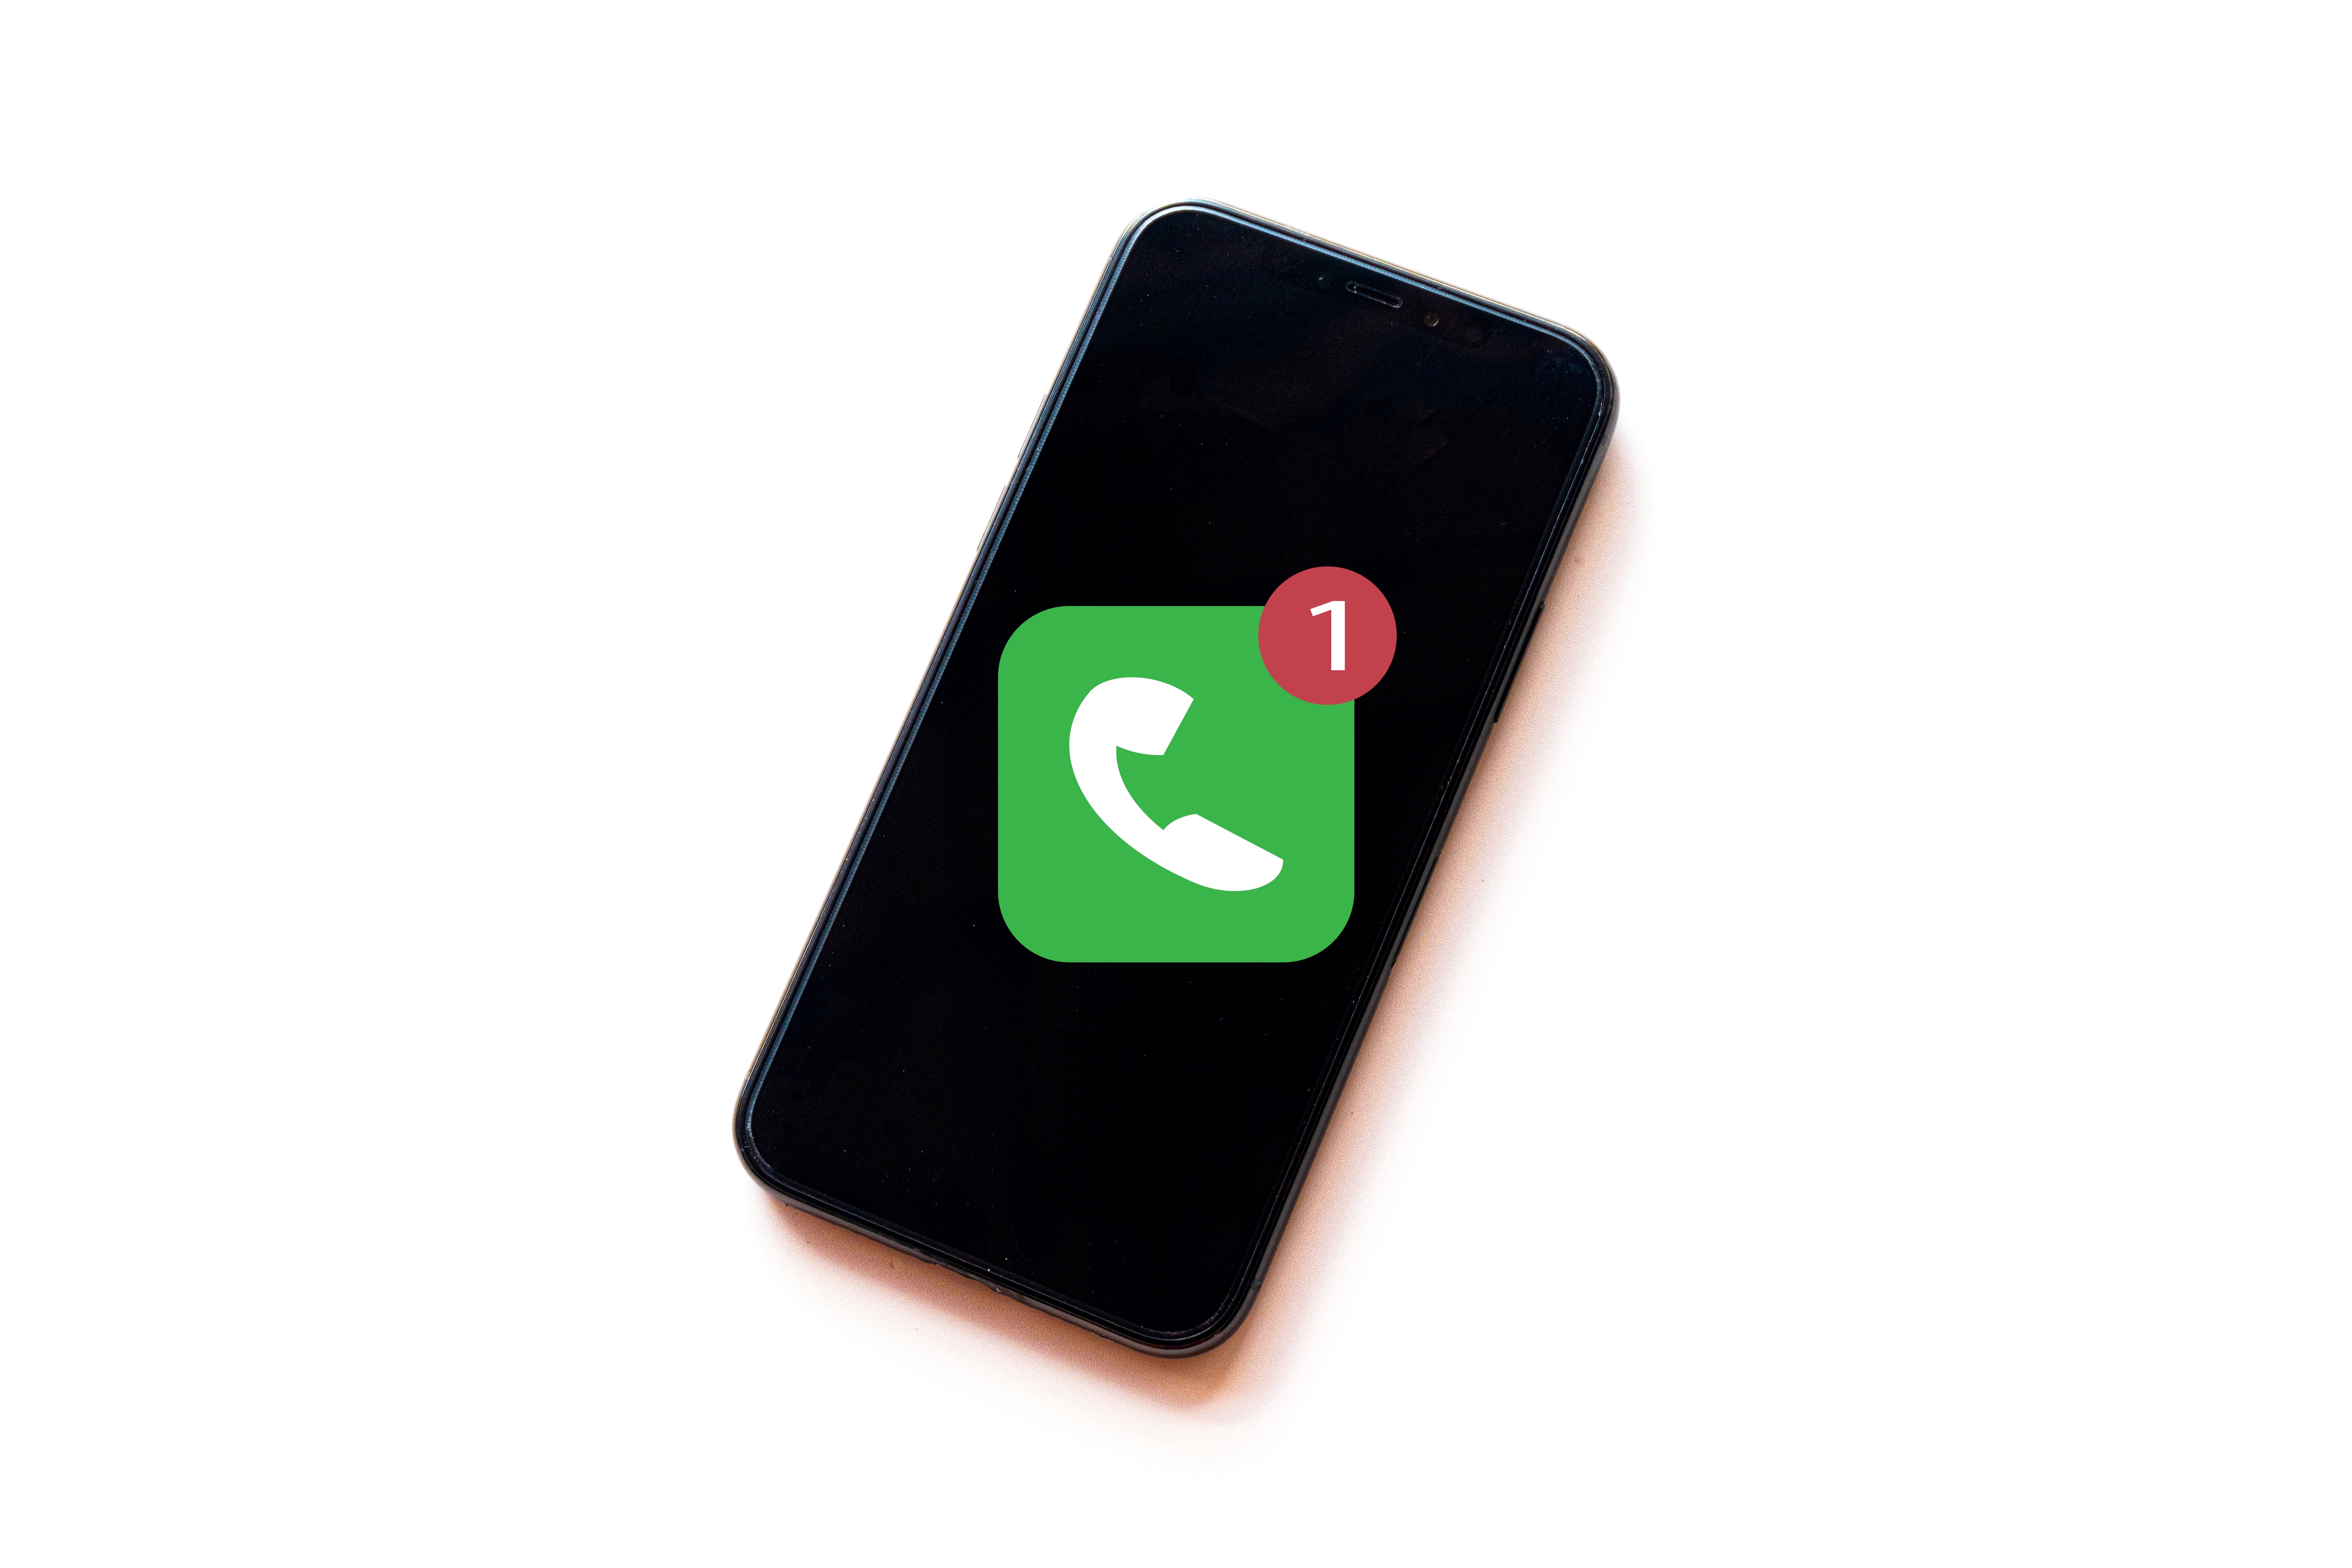 A smart phone showing a missed call | Source: Shutterstock